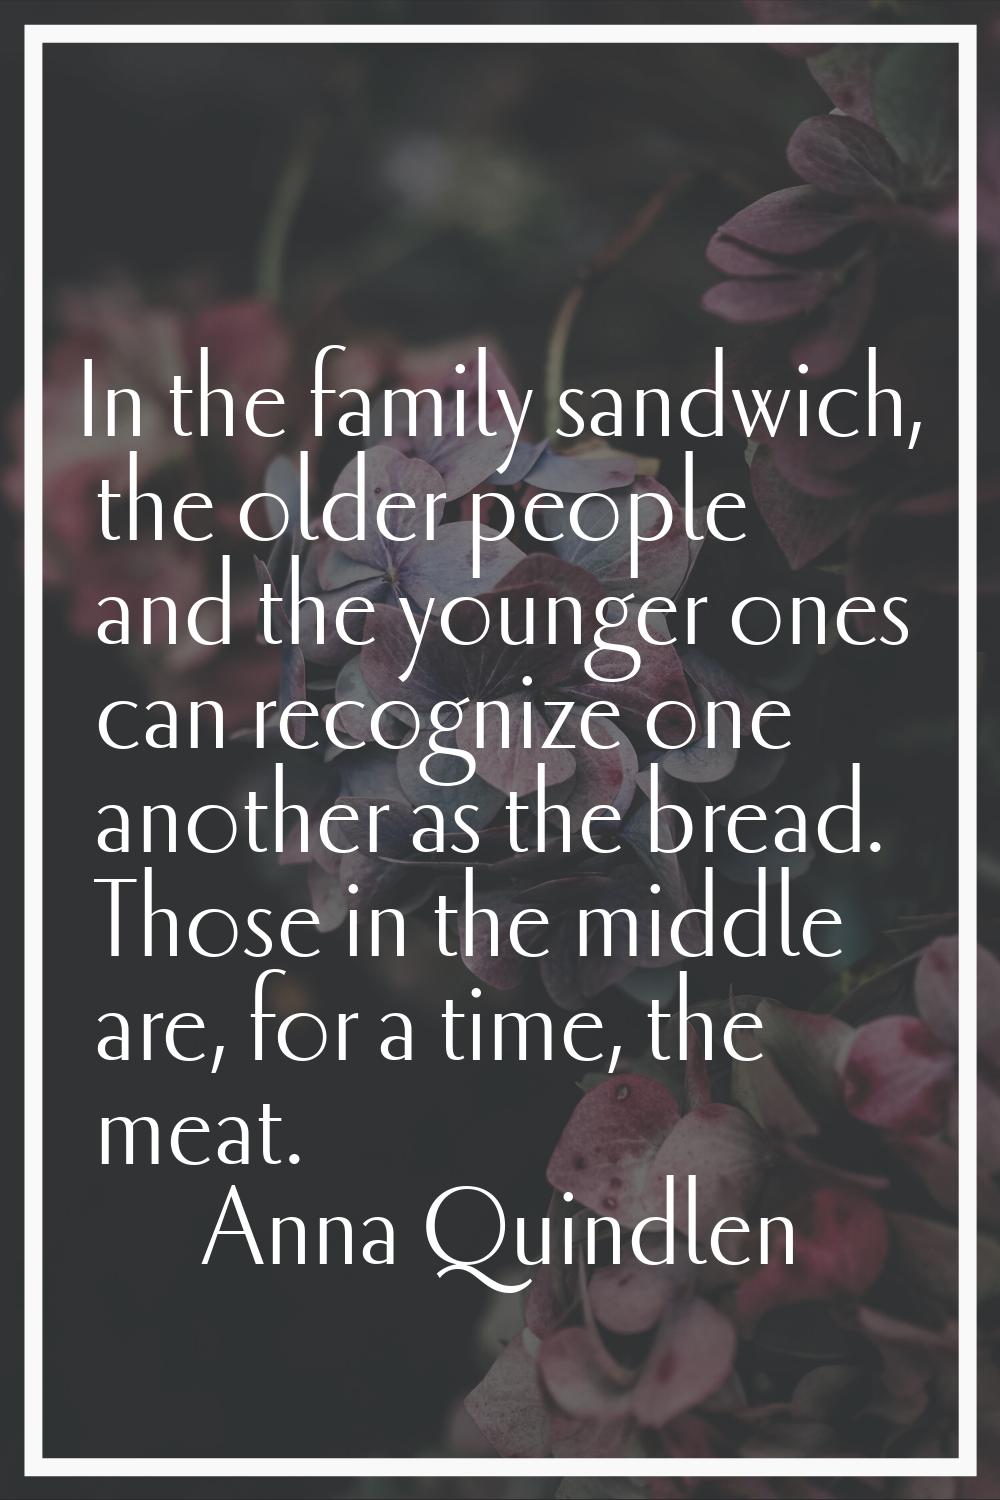 In the family sandwich, the older people and the younger ones can recognize one another as the brea